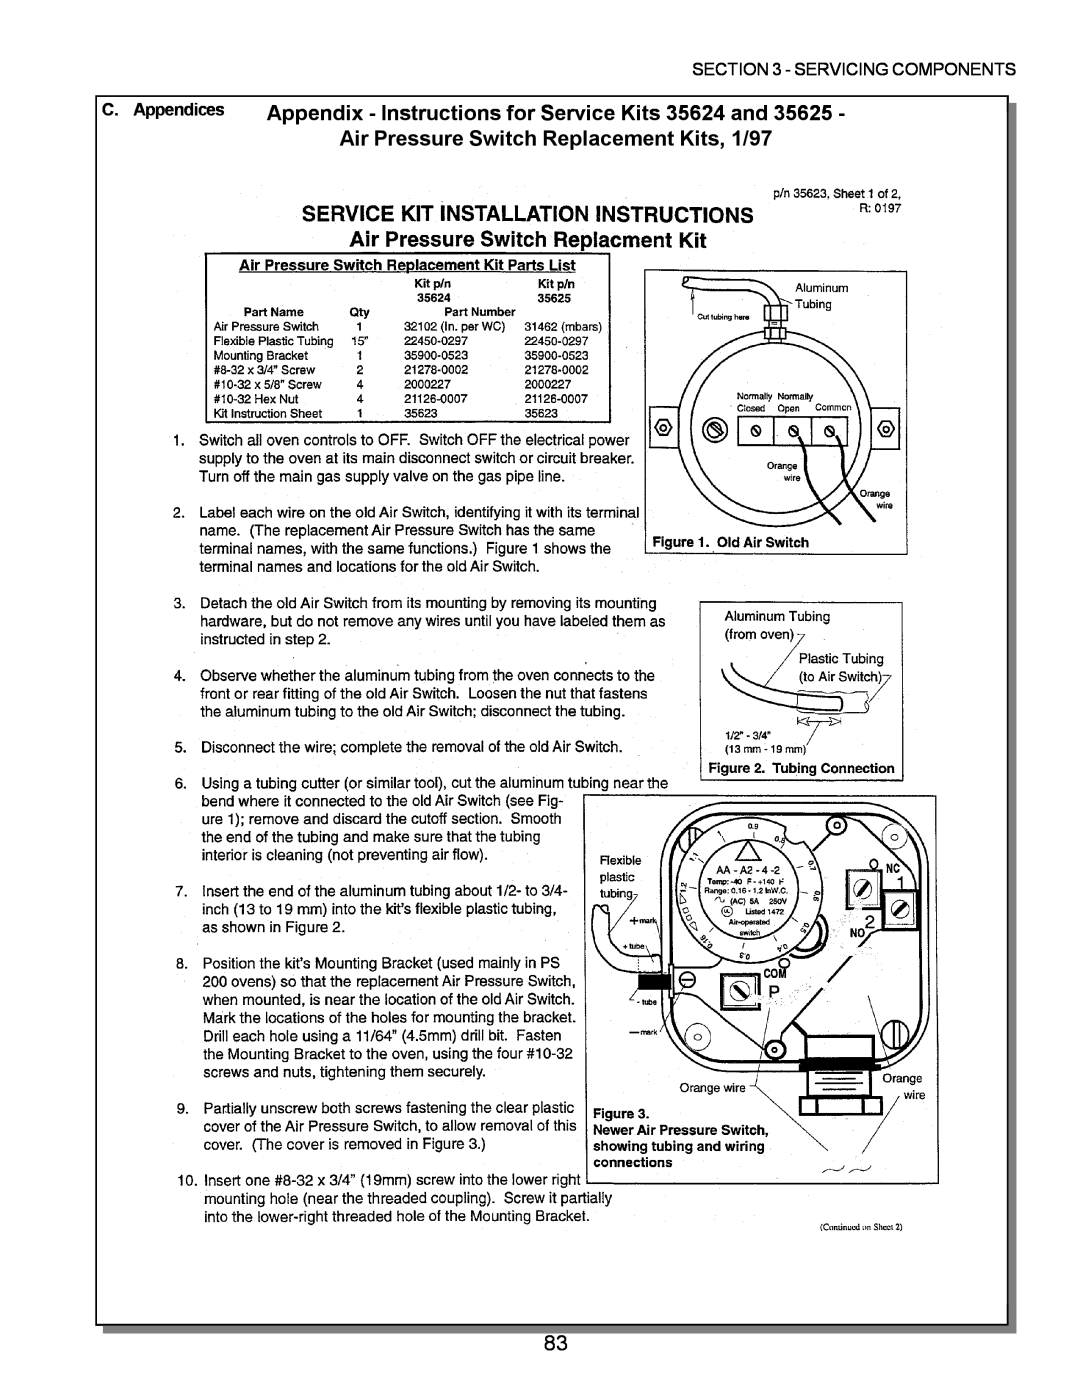 Middleby Marshall PS570 Appendix - Instructions for Service Kits 35624 and, Air Pressure Switch Replacement Kits, 1/97 